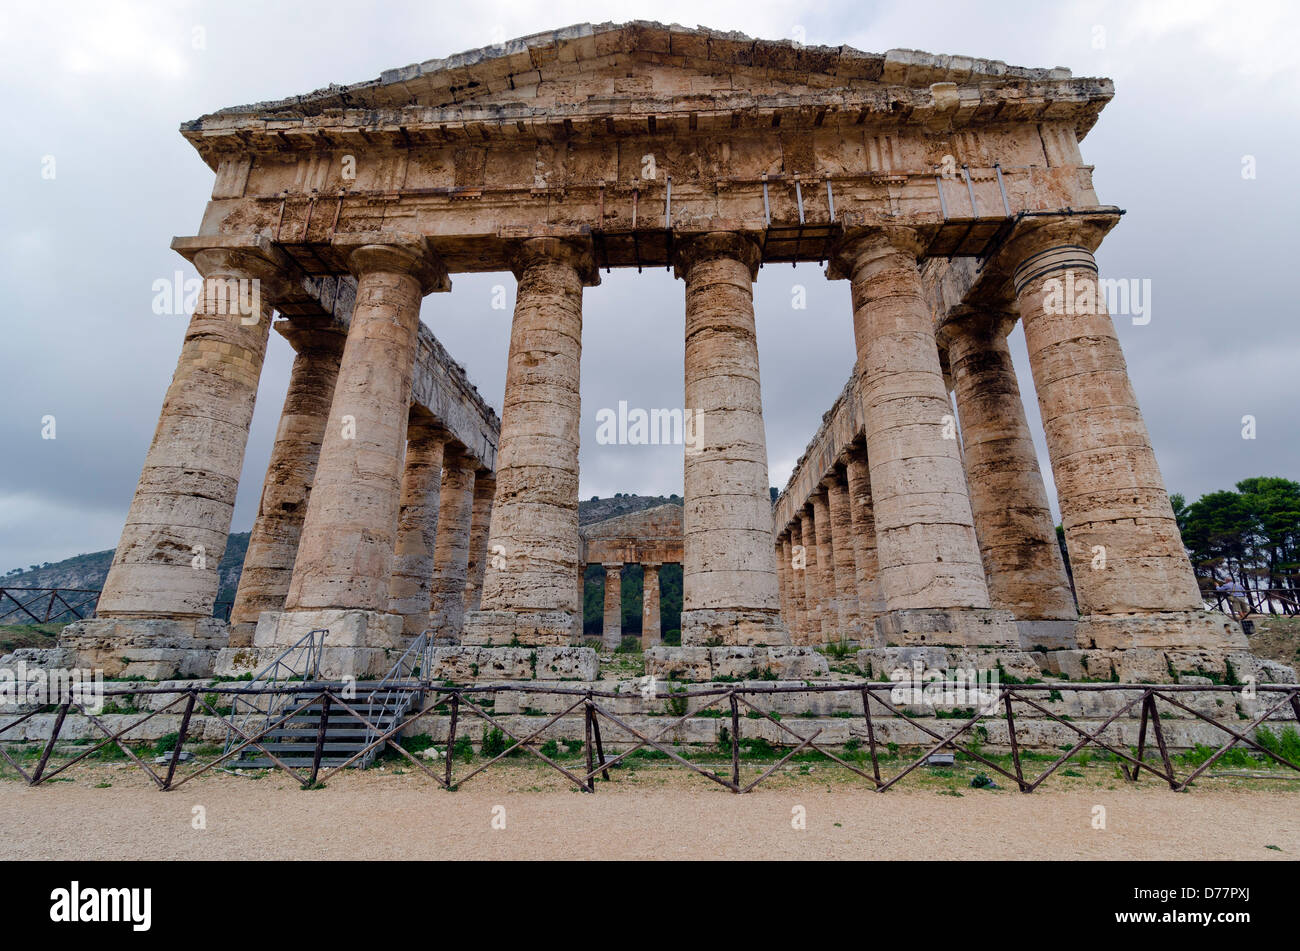 The ancient city of Segesta is situated in the province of Trapani, in the north-west of Sicily, Italy. Stock Photo